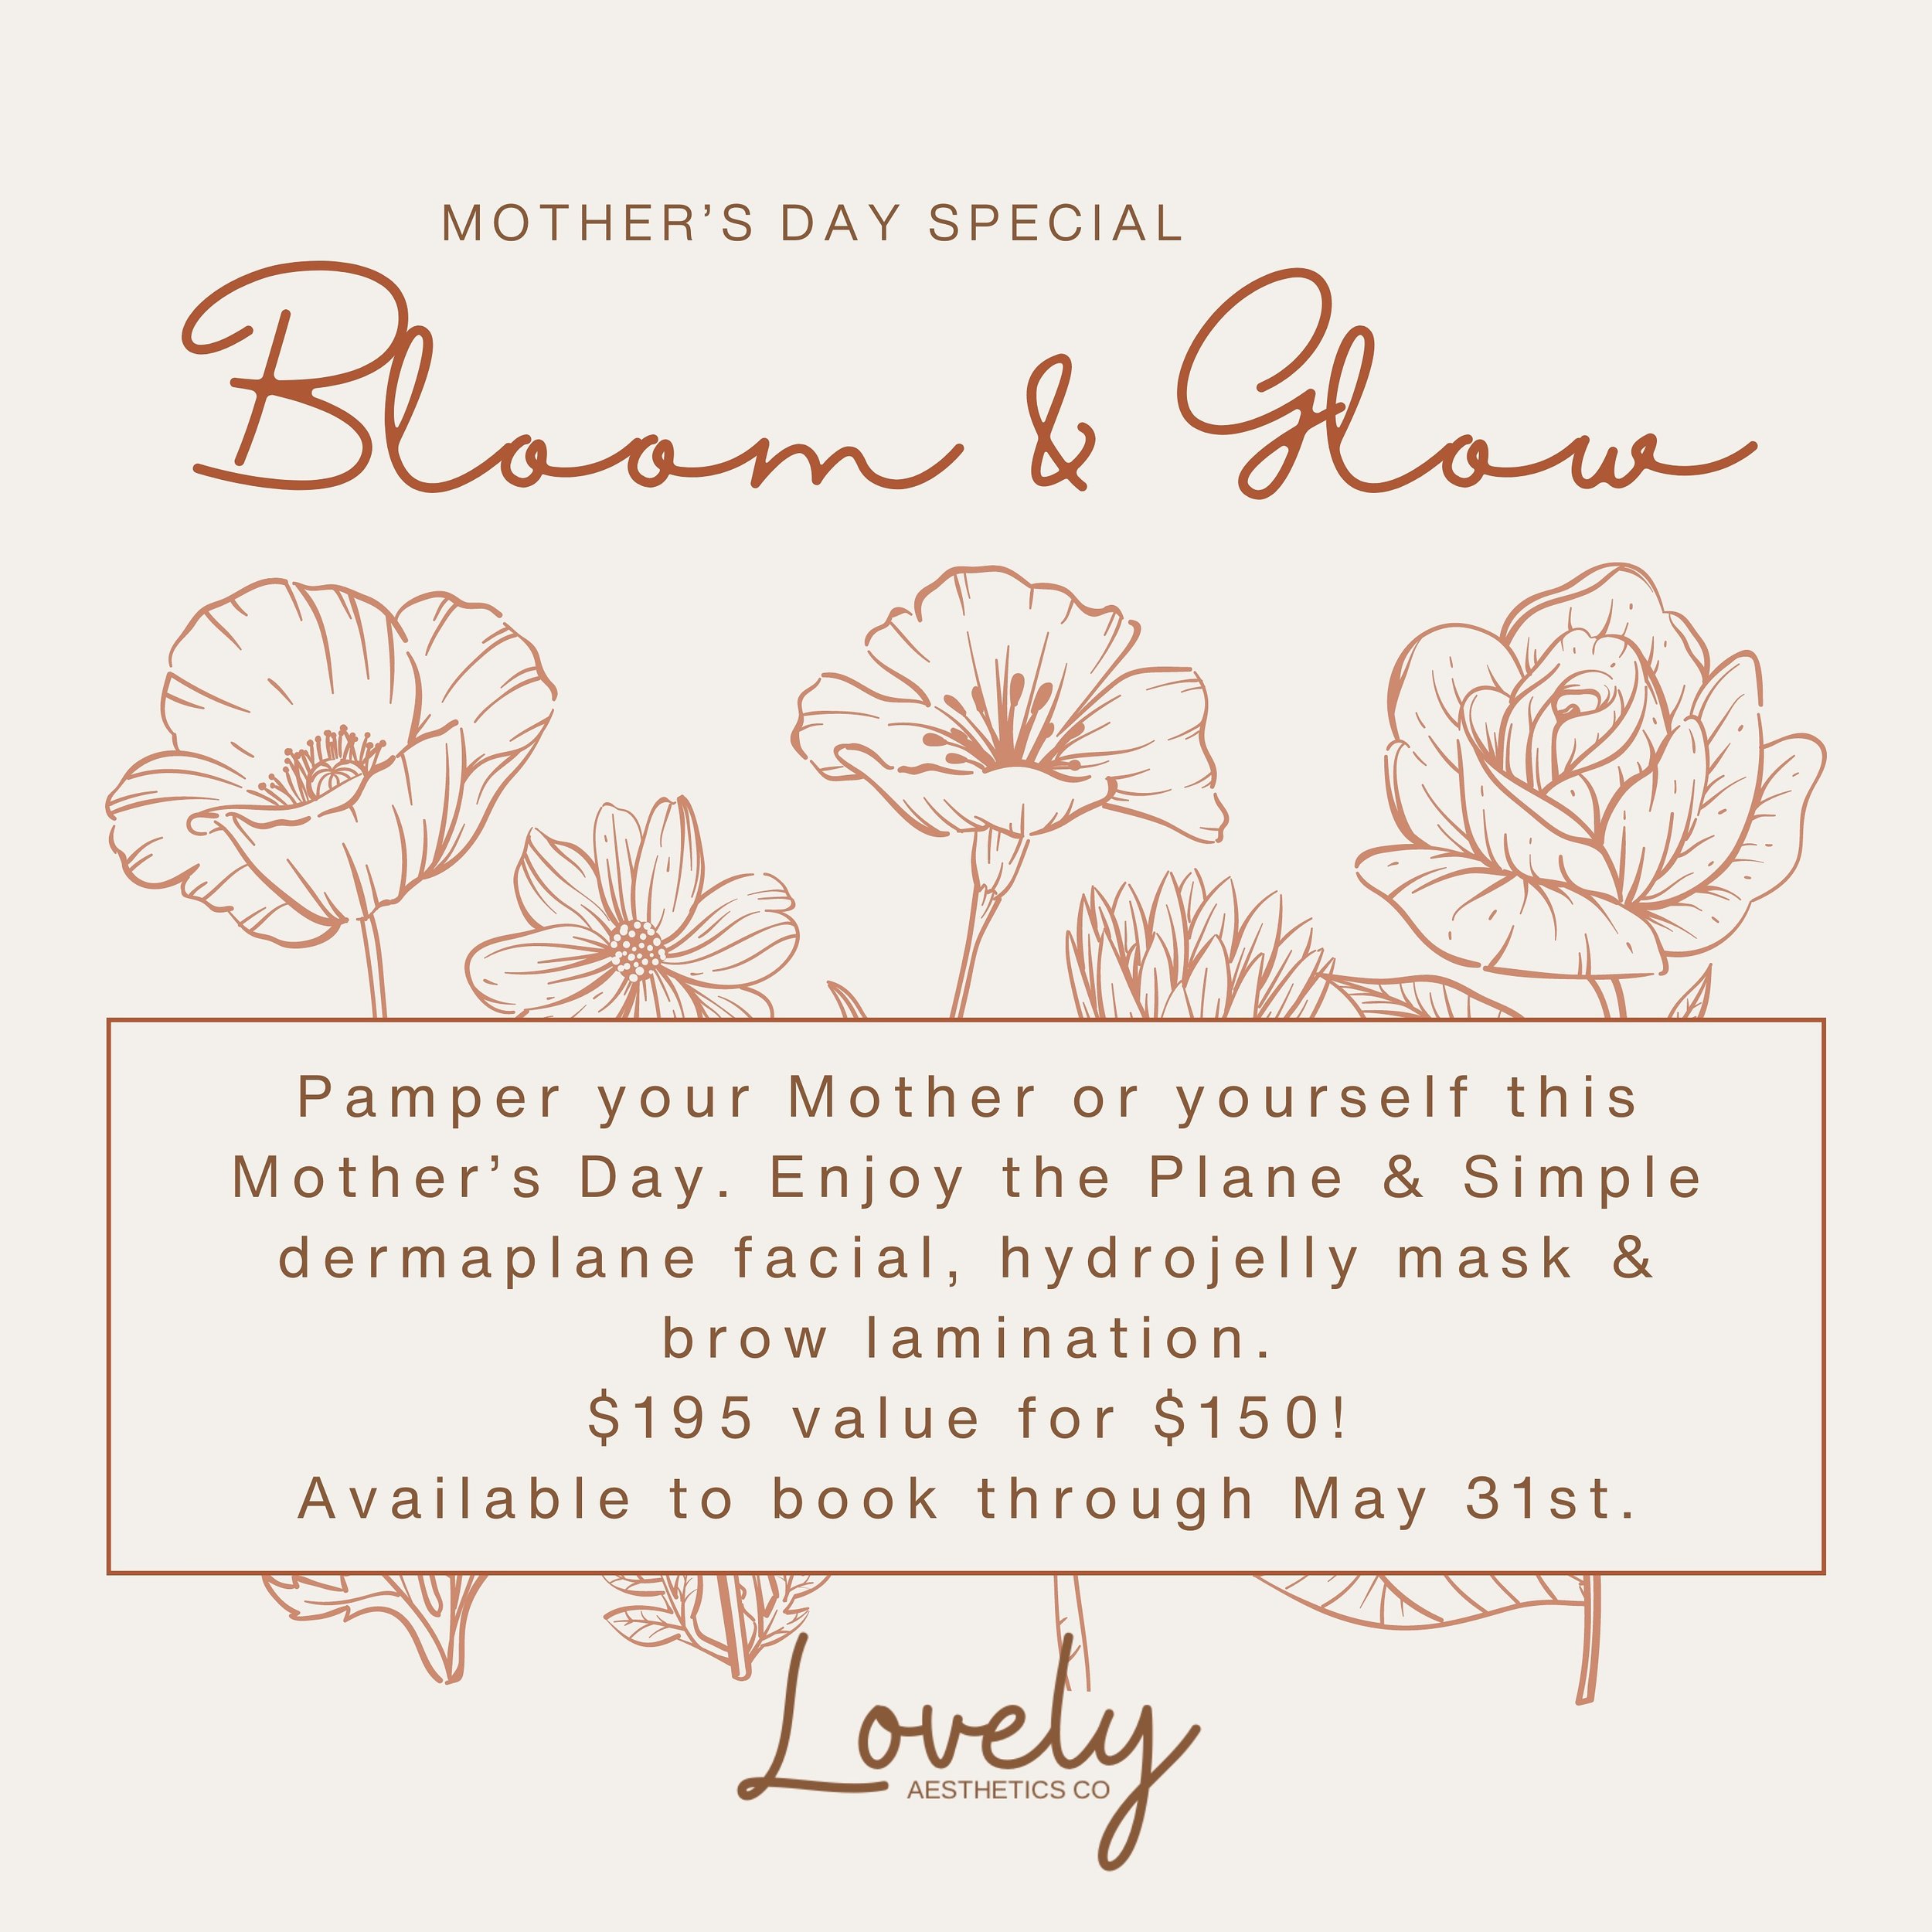 The Bloom &amp; Glow is back!! Our most popular package is back in time for Mother&rsquo;s Day.

Treat your mom or yourself to the Bloom and Glow! Her skin will love her and she will love you even more!

We also have Gift Certificates available!

Lad